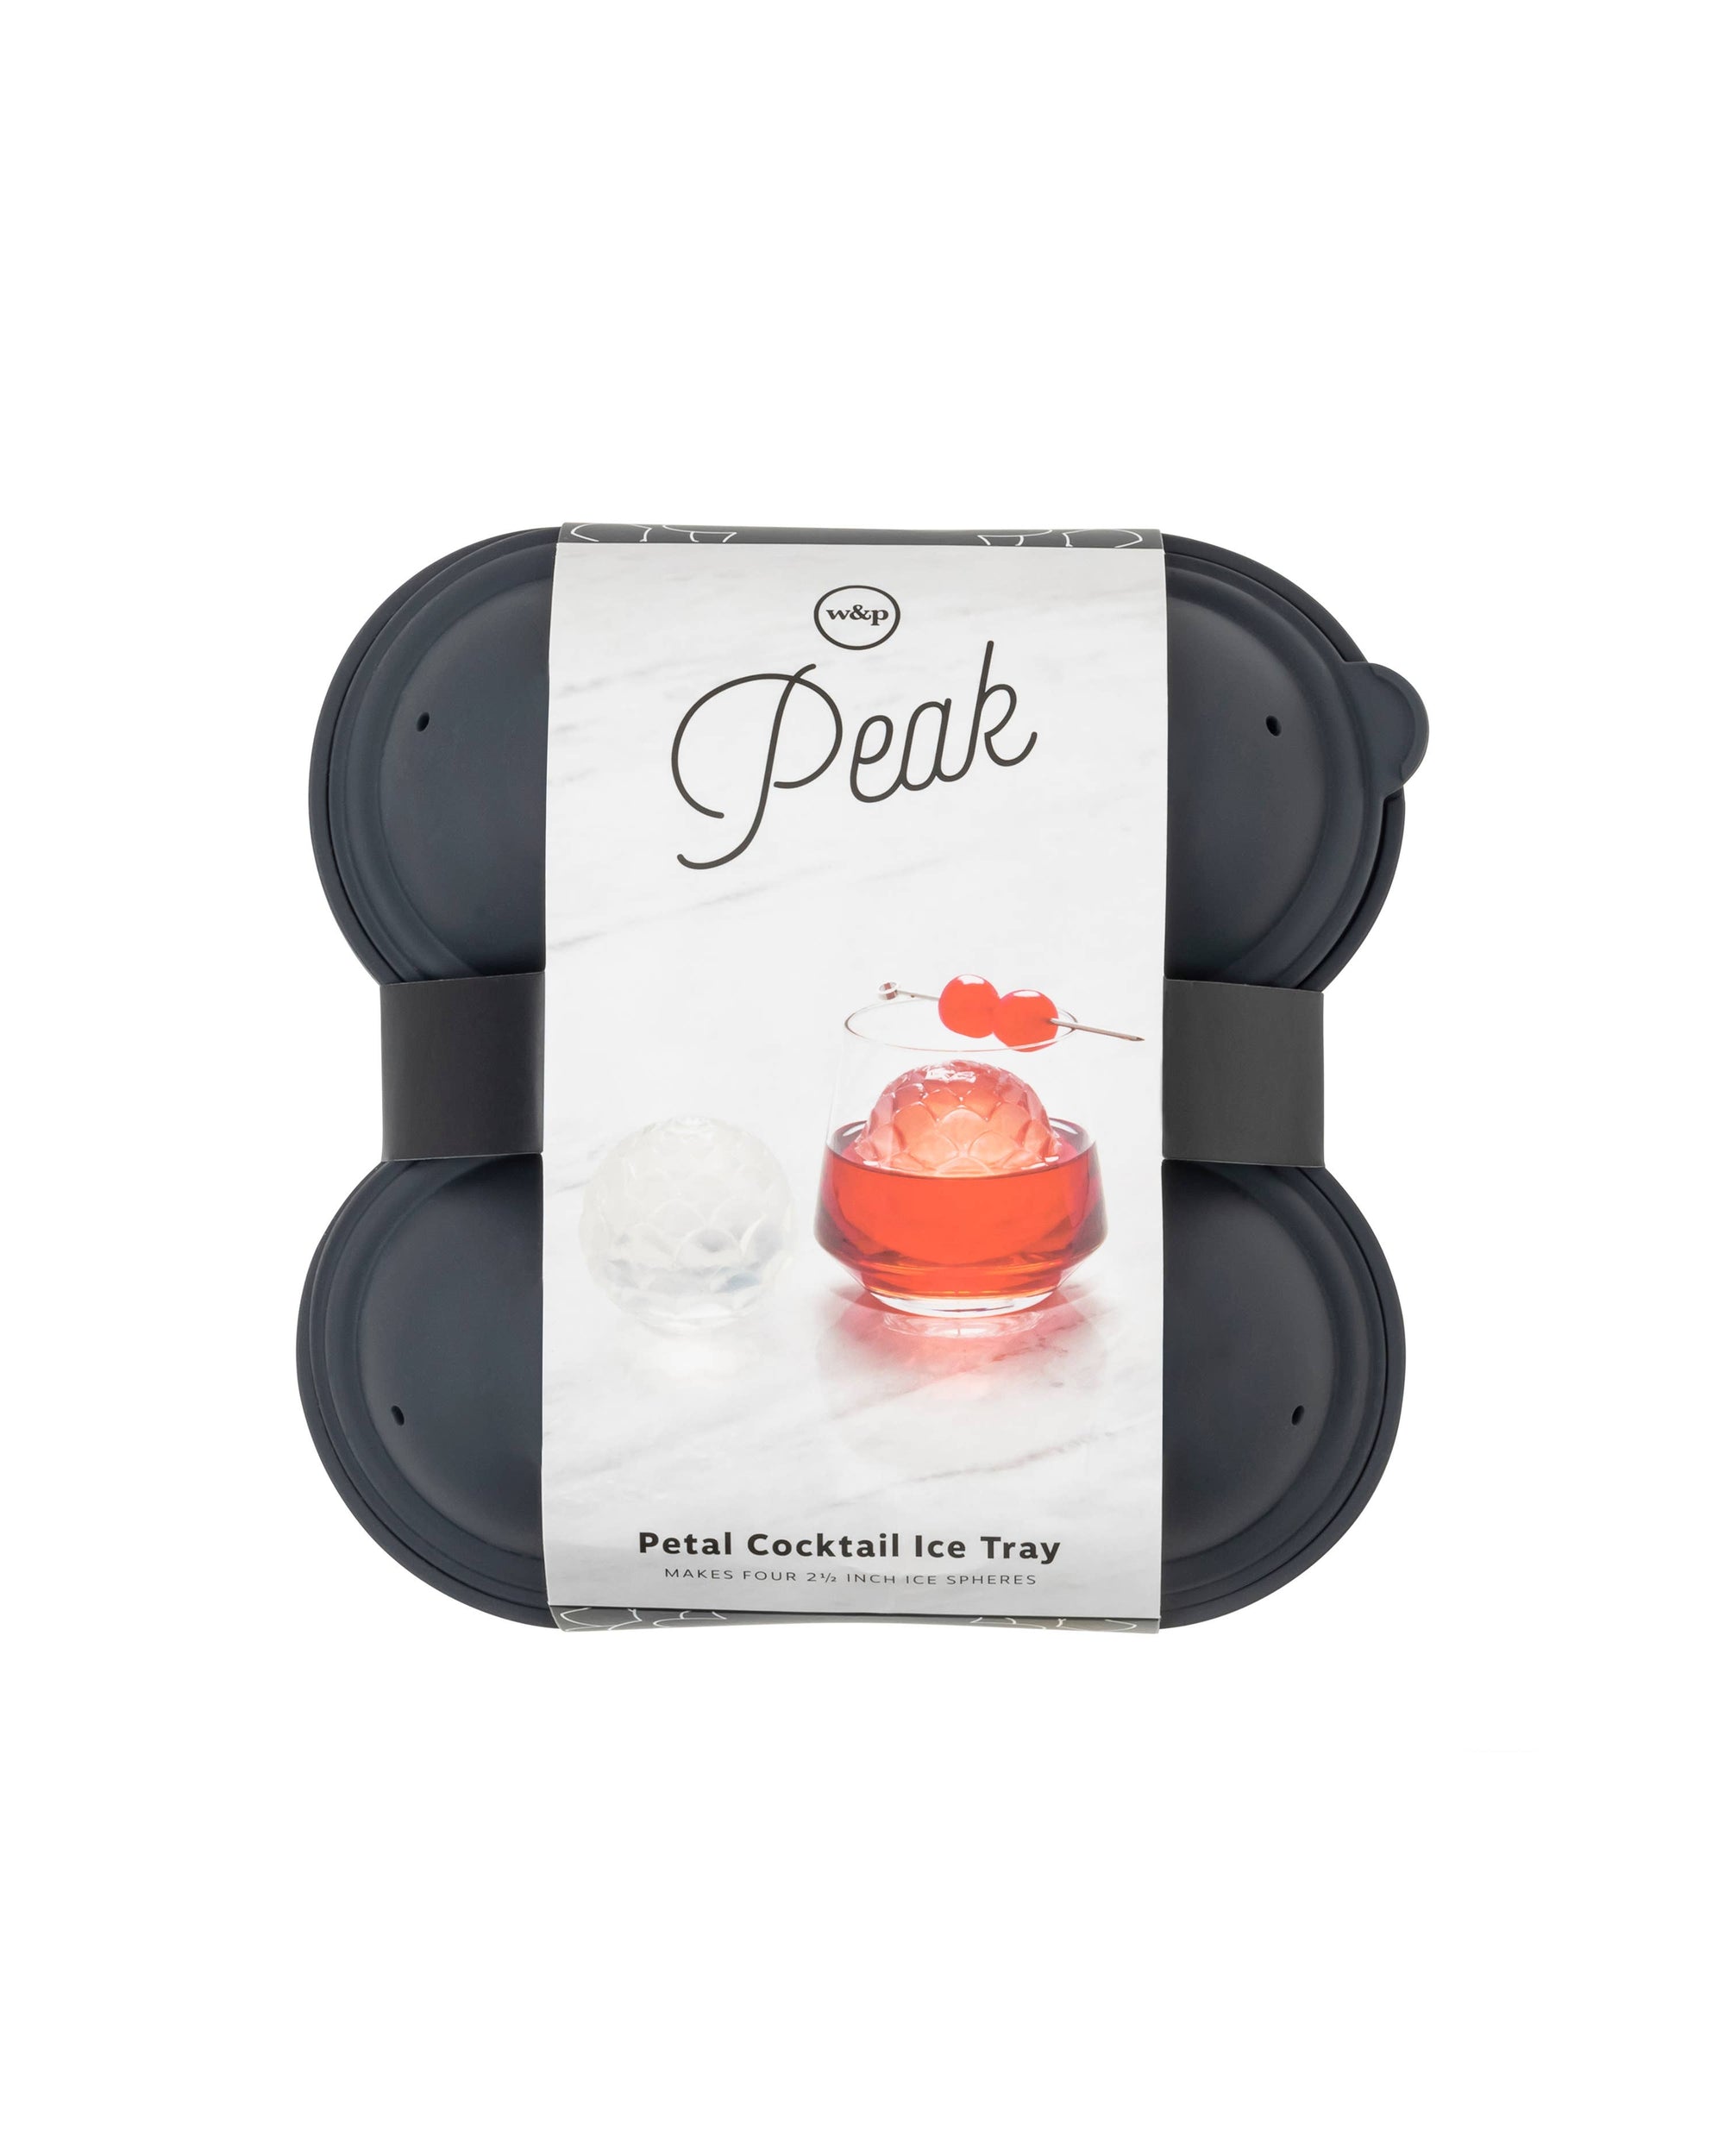 Petal Cocktail Art Ice Cube Silicone Tray